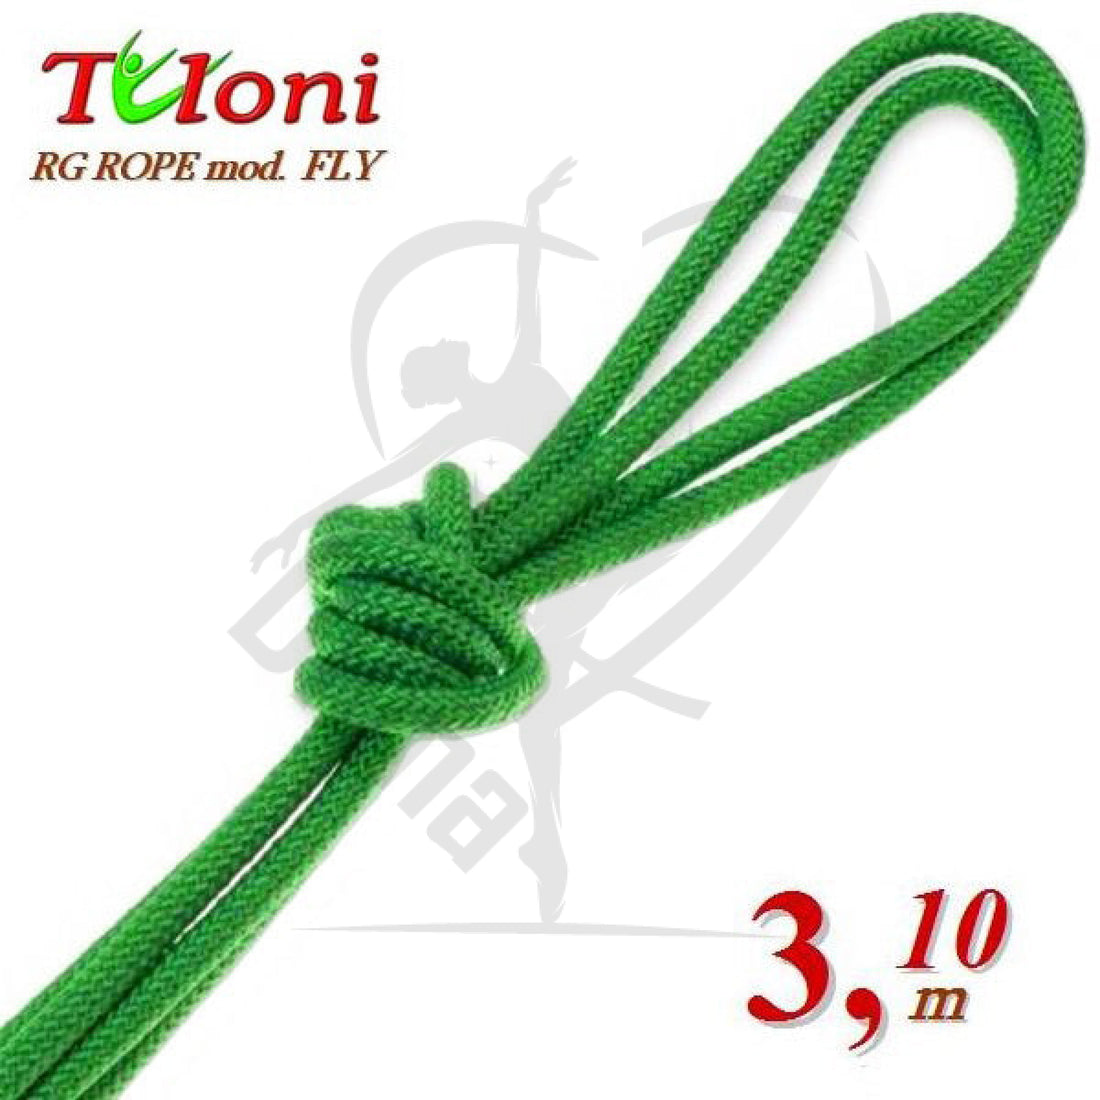 Tuloni Competition Rope For Seniors Mod. Fly 3.1M Green Ropes